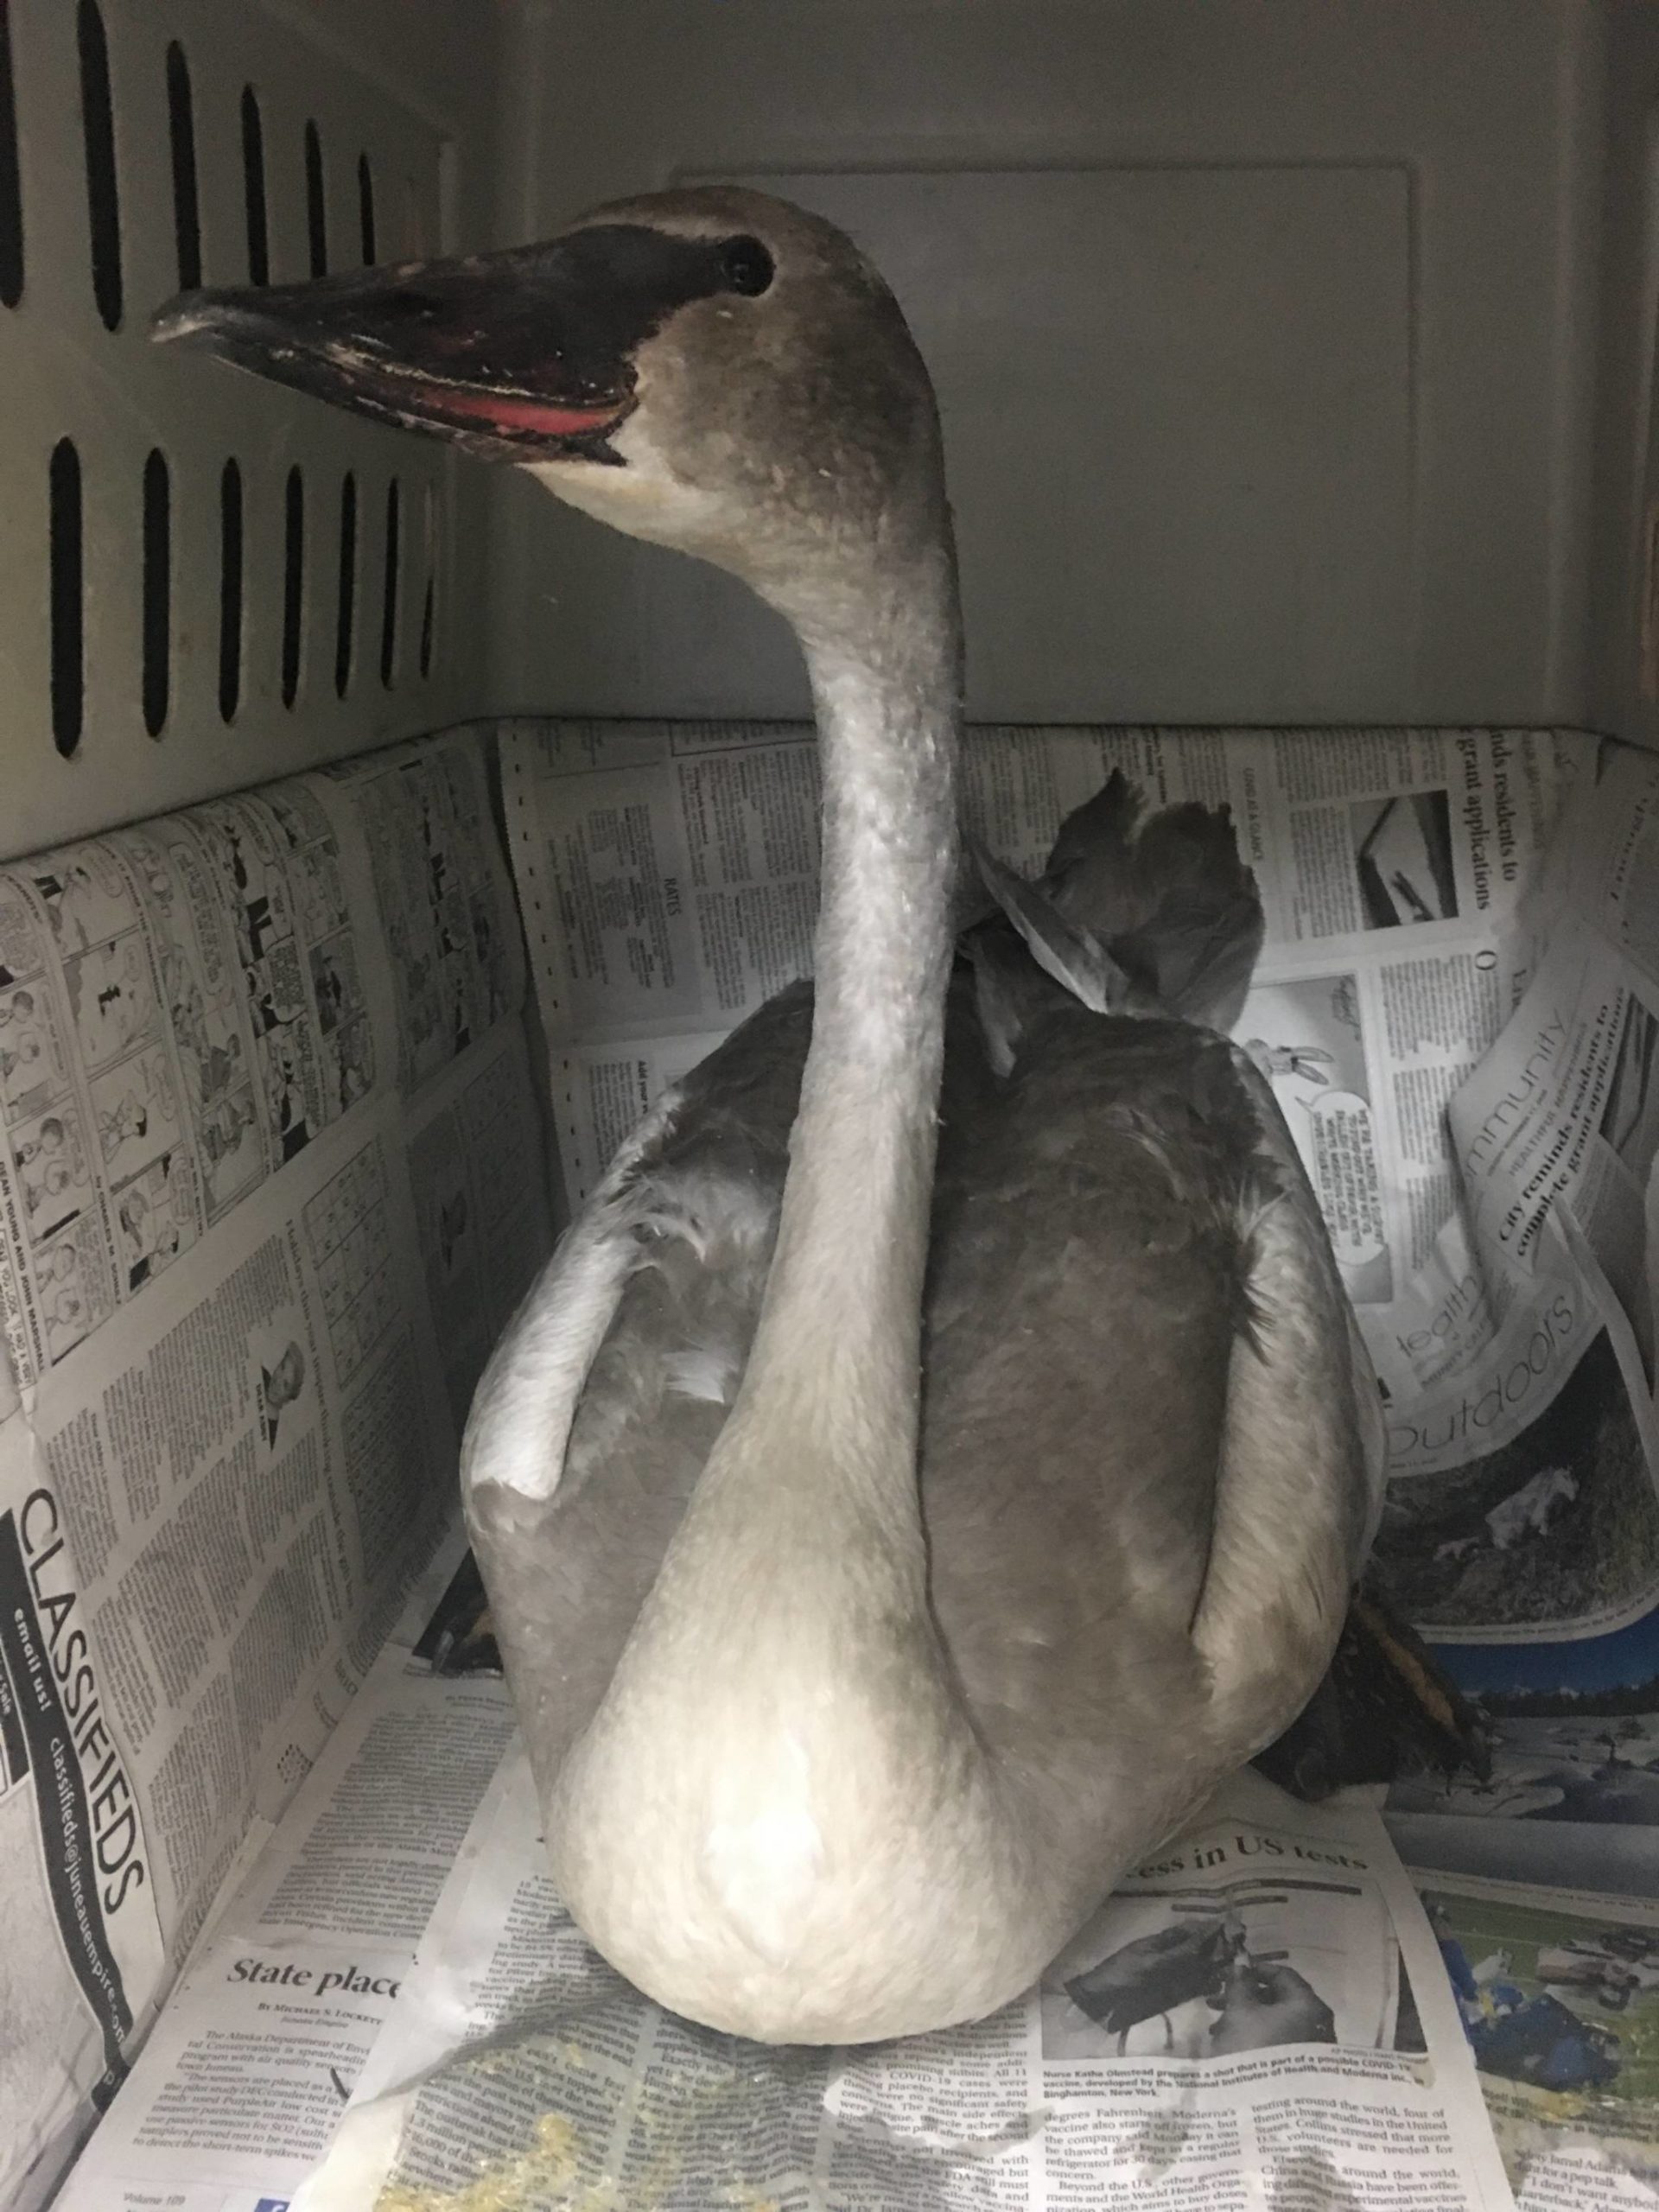 Kathy Benner, manager of the Juneau Raptor Center, along with Matthew Brown and Kerry Howard, captured a trumpeter swan, shown above, that had been grounded with an injured wing in the Auke Lake/Auke Bay area for months on Wednesday, Feb. 24, 2021. (Courtesy photo / Kathy Benner)